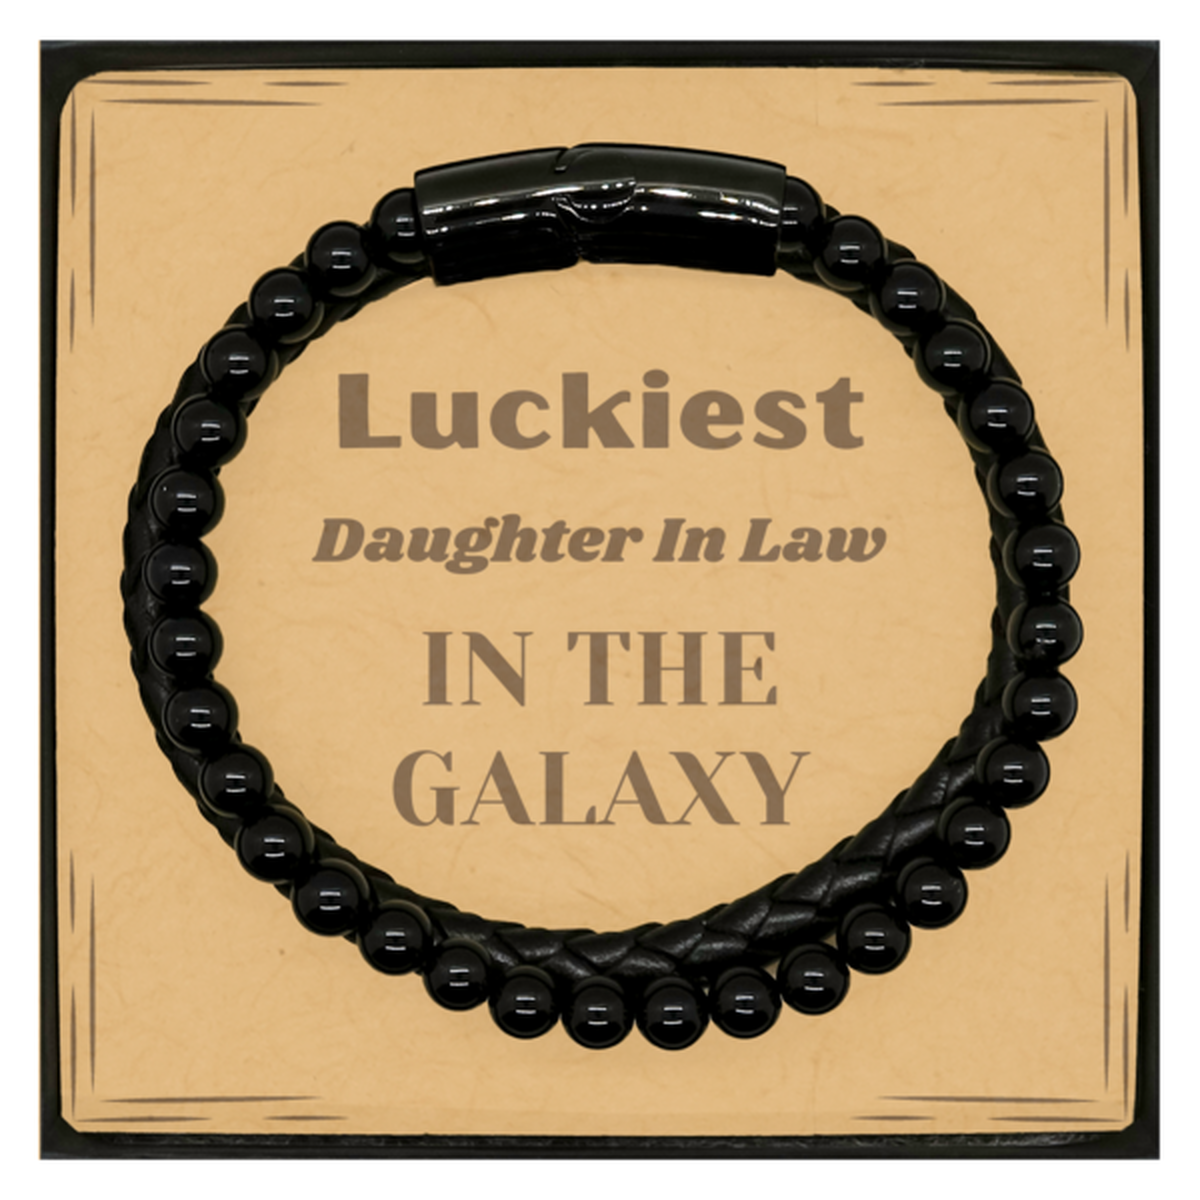 Luckiest Daughter In Law in the Galaxy, To My Daughter In Law Message Card Gifts, Christmas Daughter In Law Stone Leather Bracelets Gifts, X-mas Birthday Unique Gifts For Daughter In Law Men Women